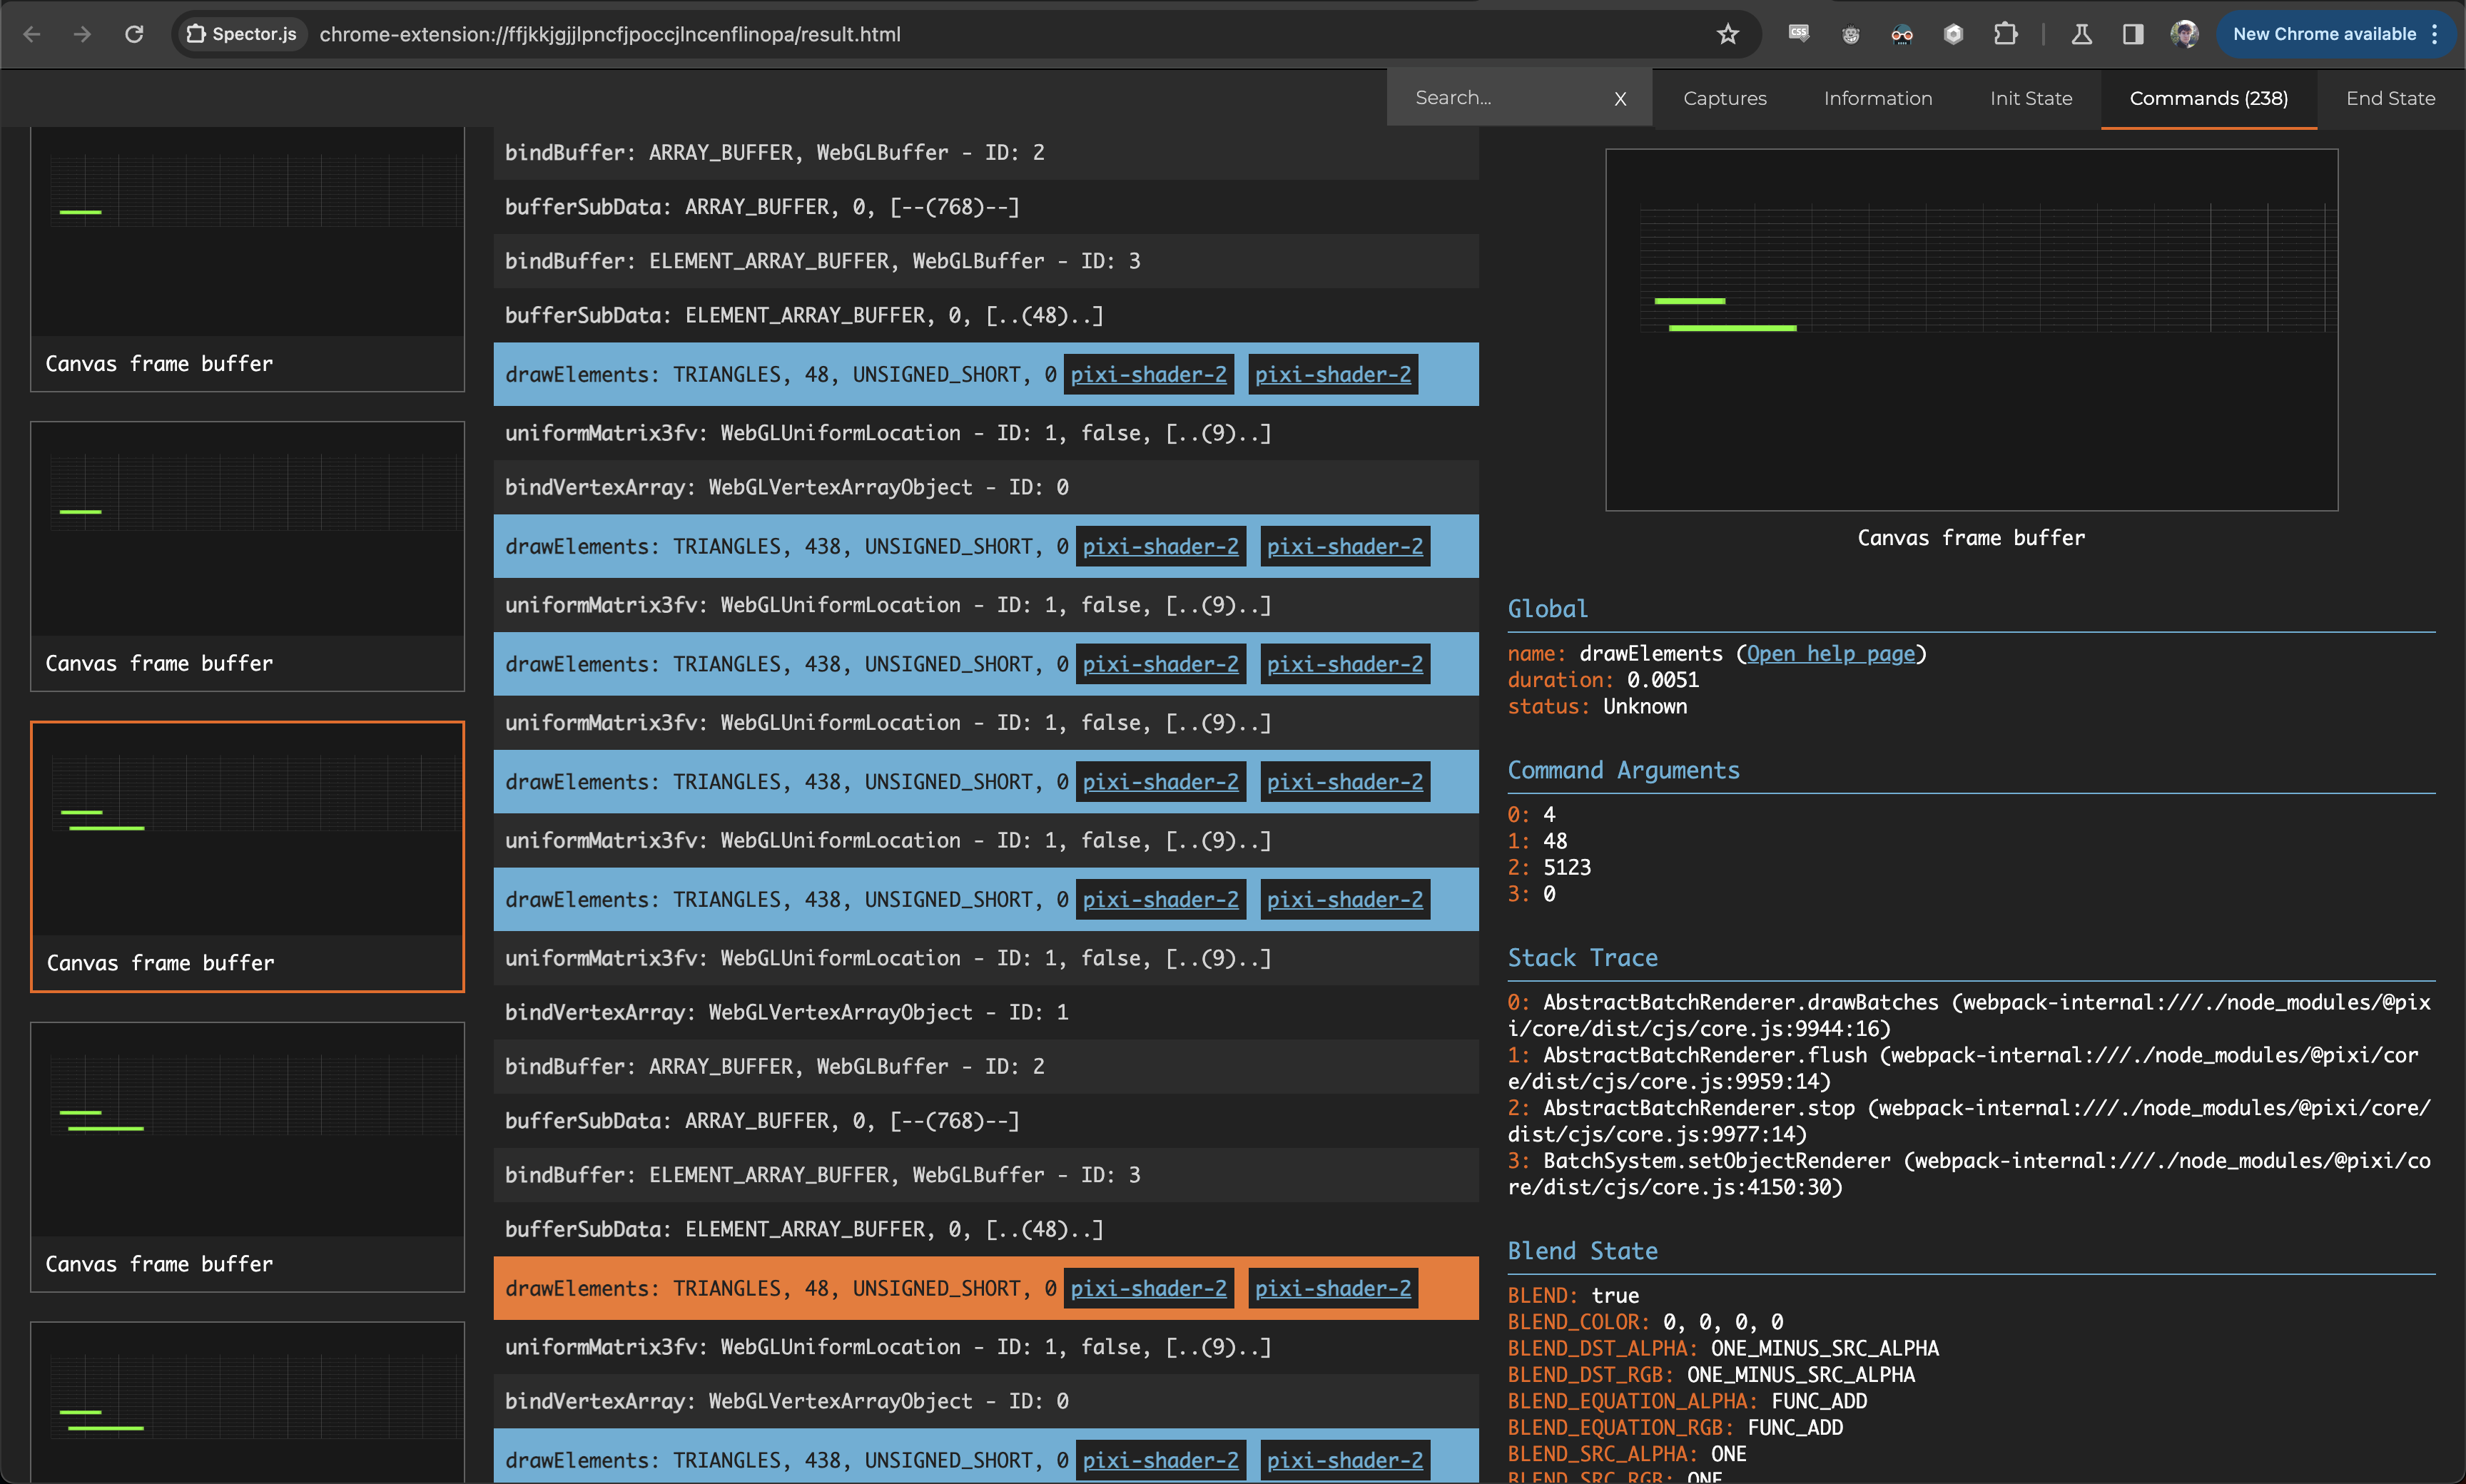 Screenshot of the Spector.JS UI showing the render passes and WebGL commands used to render the MIDI editor UI.  There are screenshots showing the result of each pass as it builds up the UI; each one adds a new line and the notes contained within that pass.  In the middle it shows commands like drawElements, bufferSubData, etc.  On the right it shows details for the currently selected pass such as a stack trace, WebGL flags, and arguments.